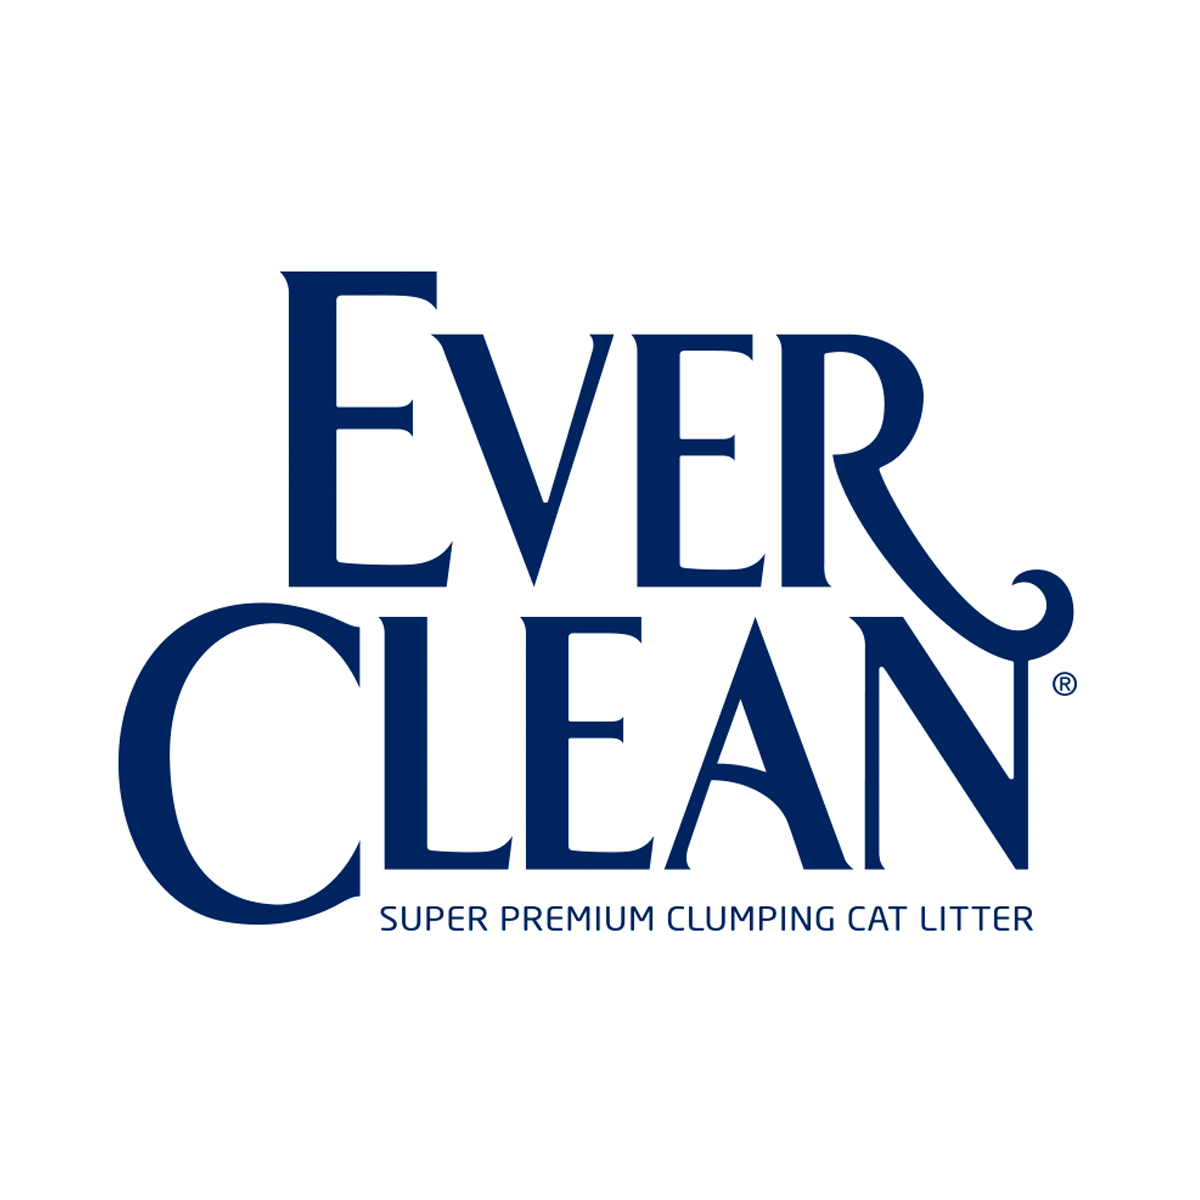 ever-clean